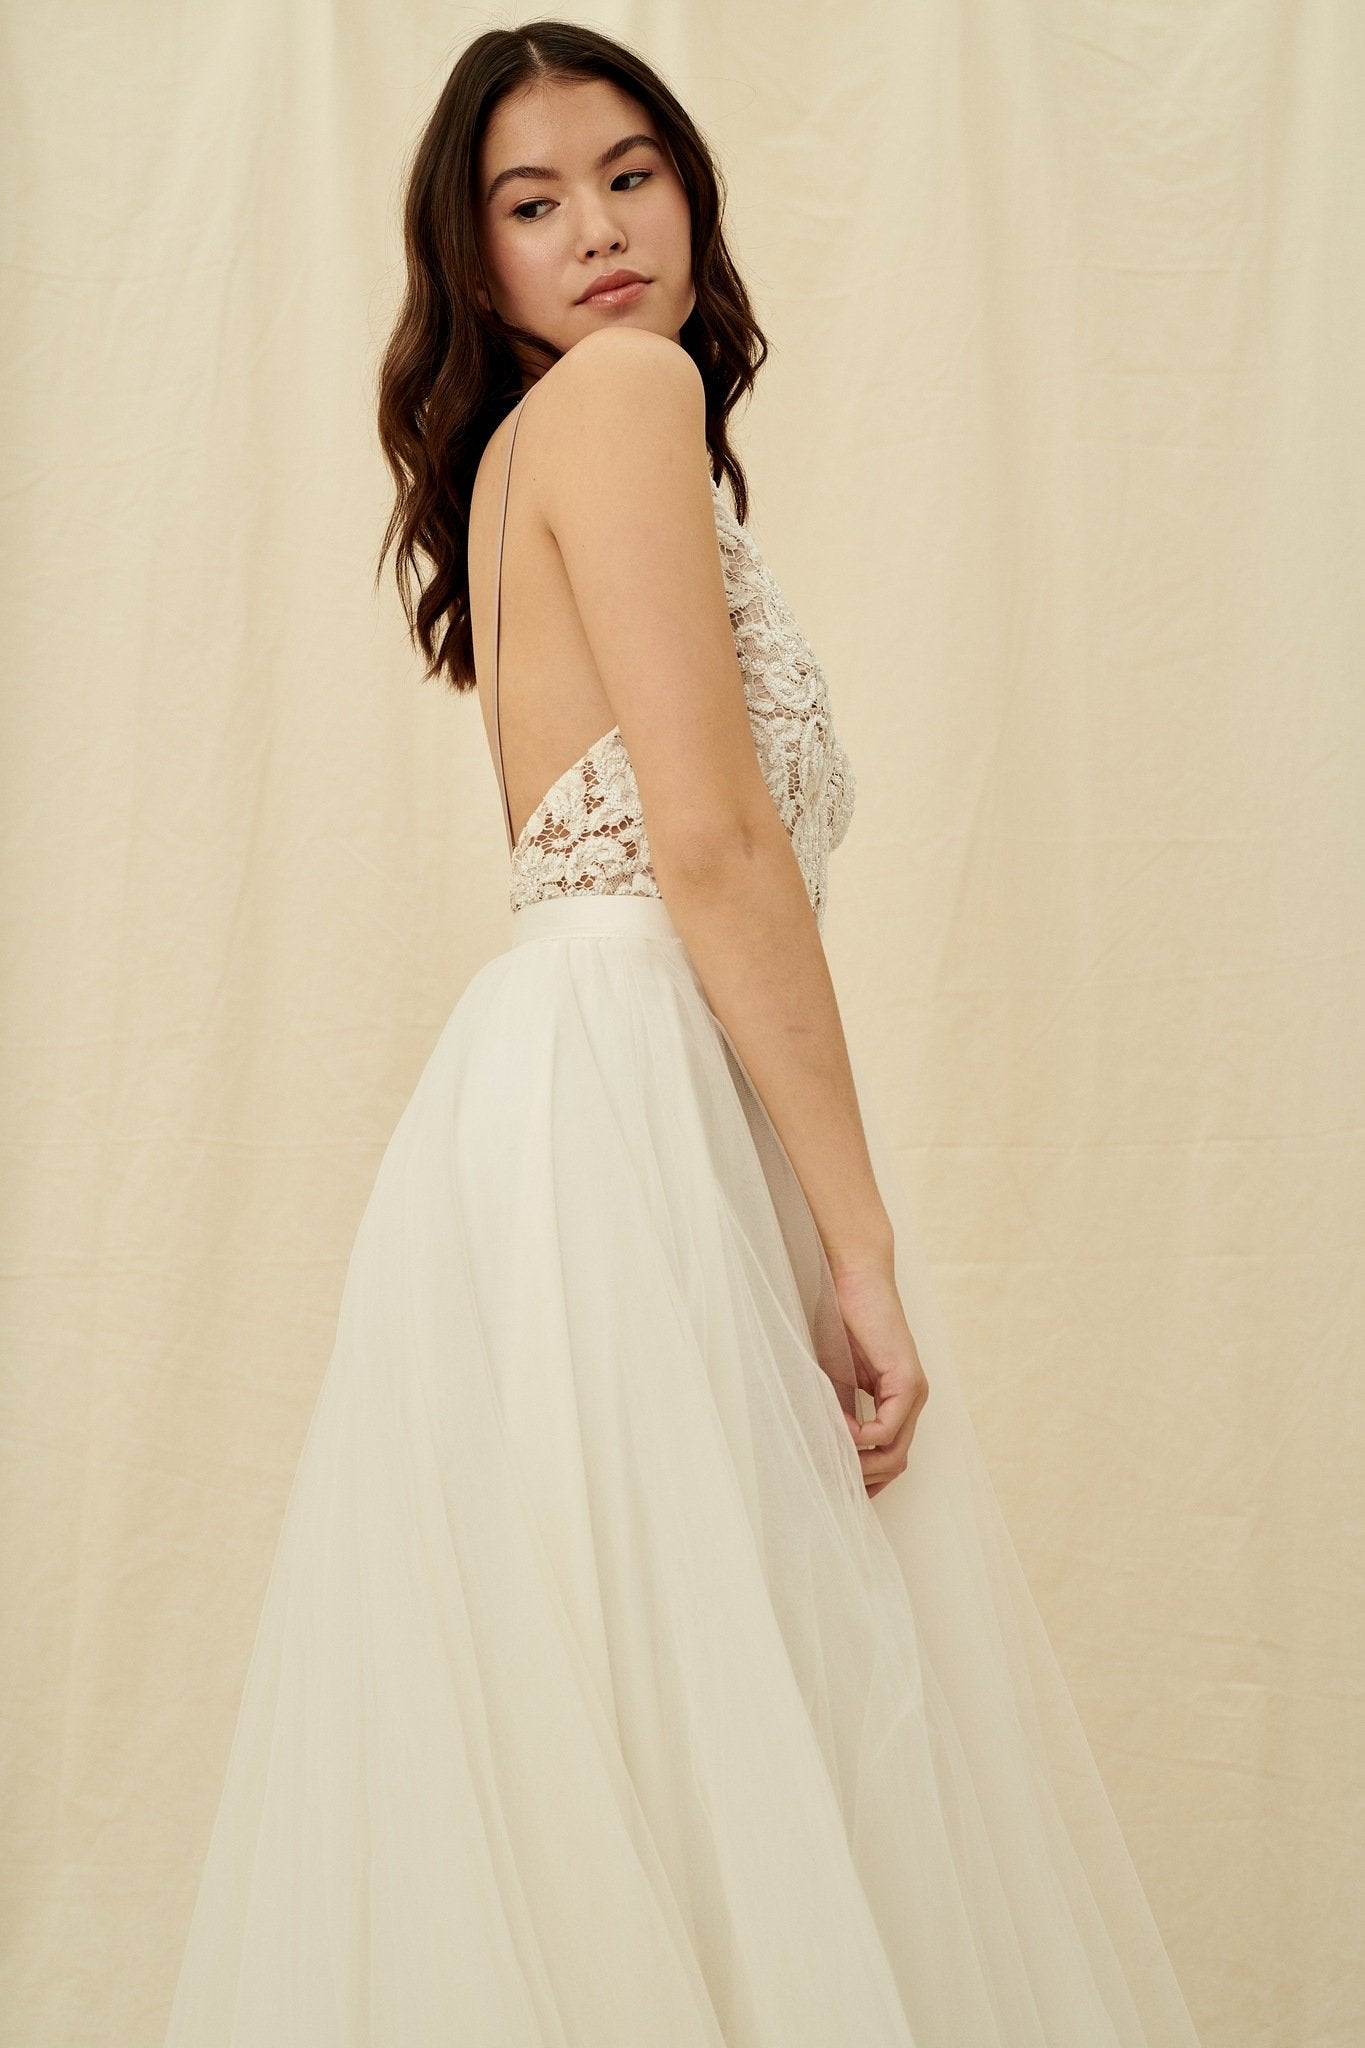 A princess wedding gown with a beaded bodice, open back, and tulle skirt with a train by Truvelle